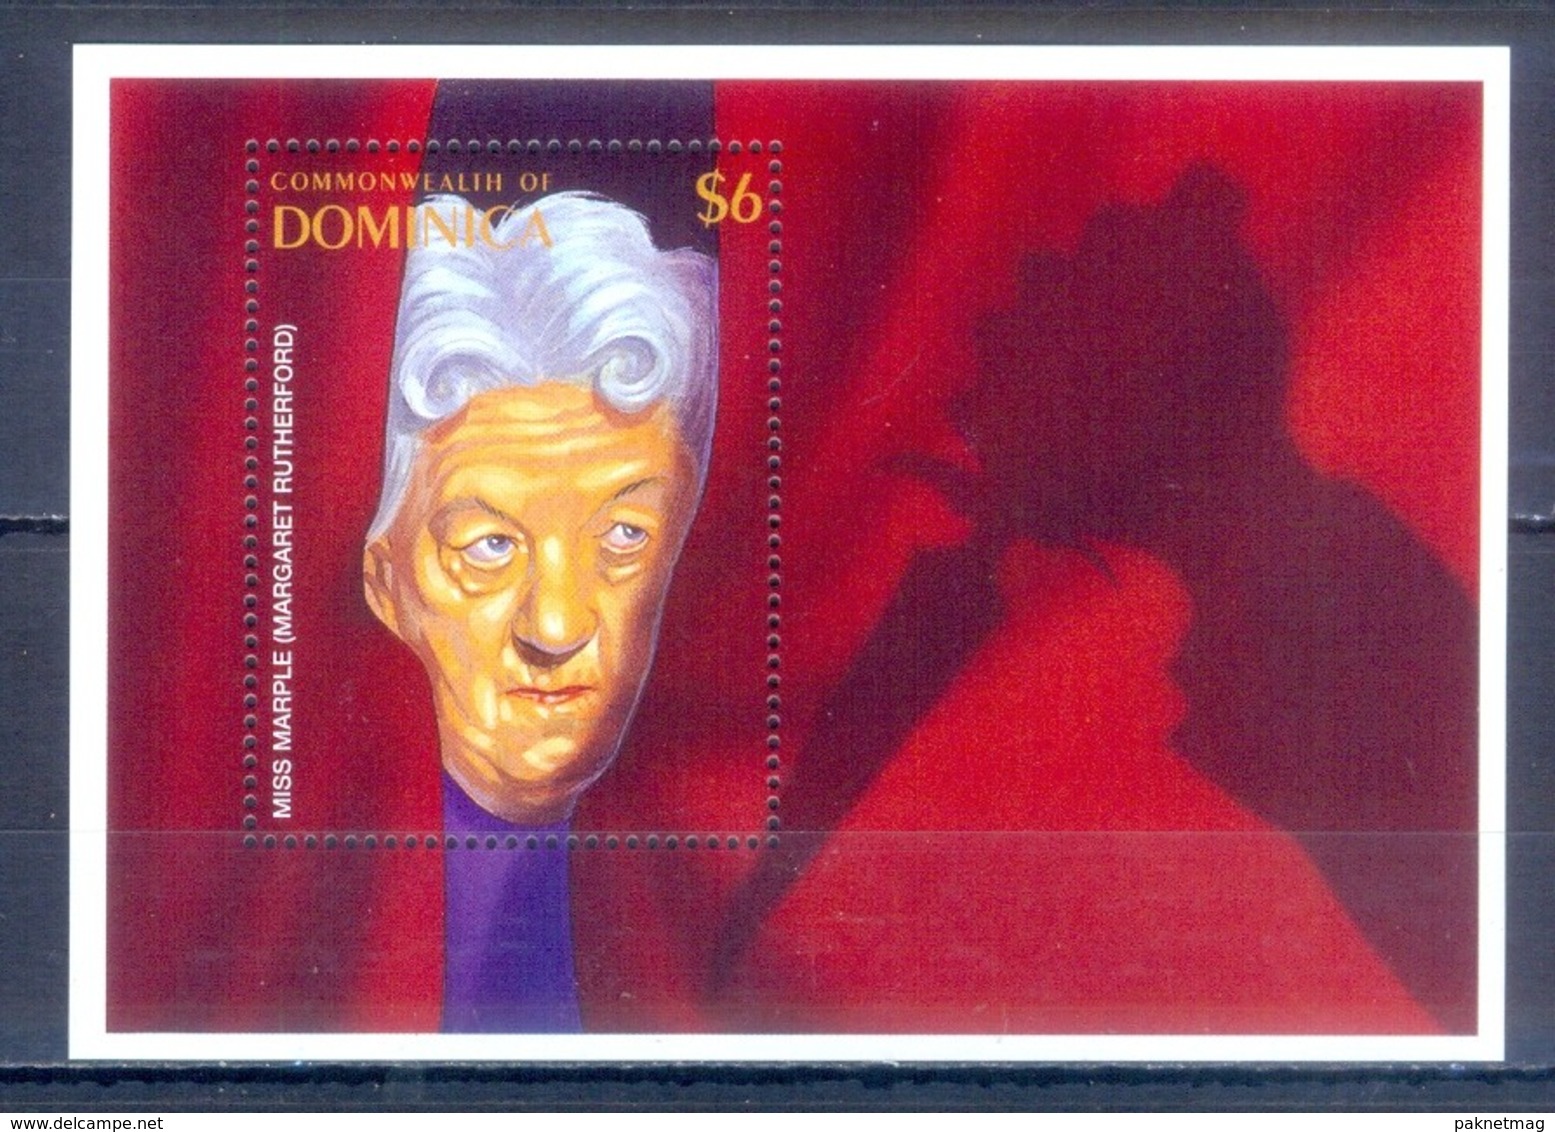 C145- Dominica 1996 Centenary Of Cinema. Margaret Rutherford. - Dominican Republic